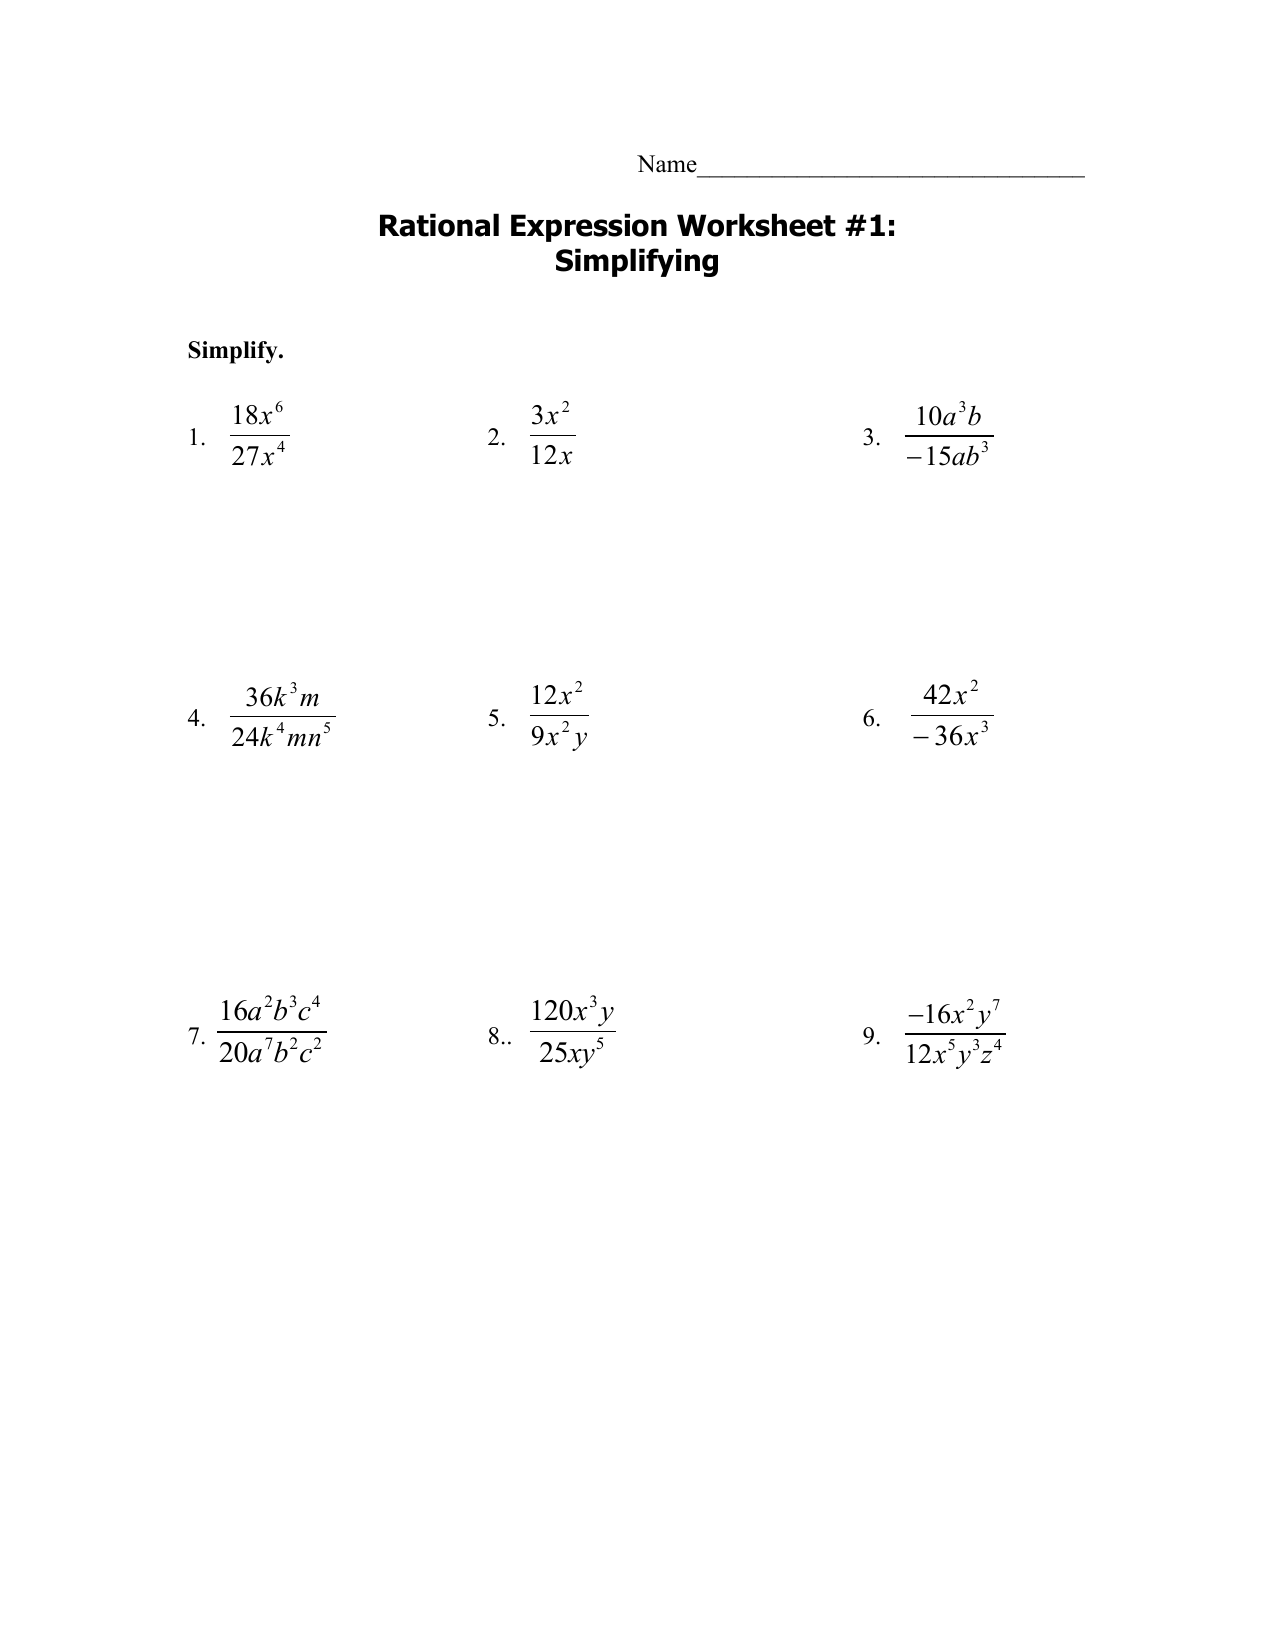 M1000 rationalworksheets100-1005 100 Pertaining To Simplifying Rational Expressions Worksheet